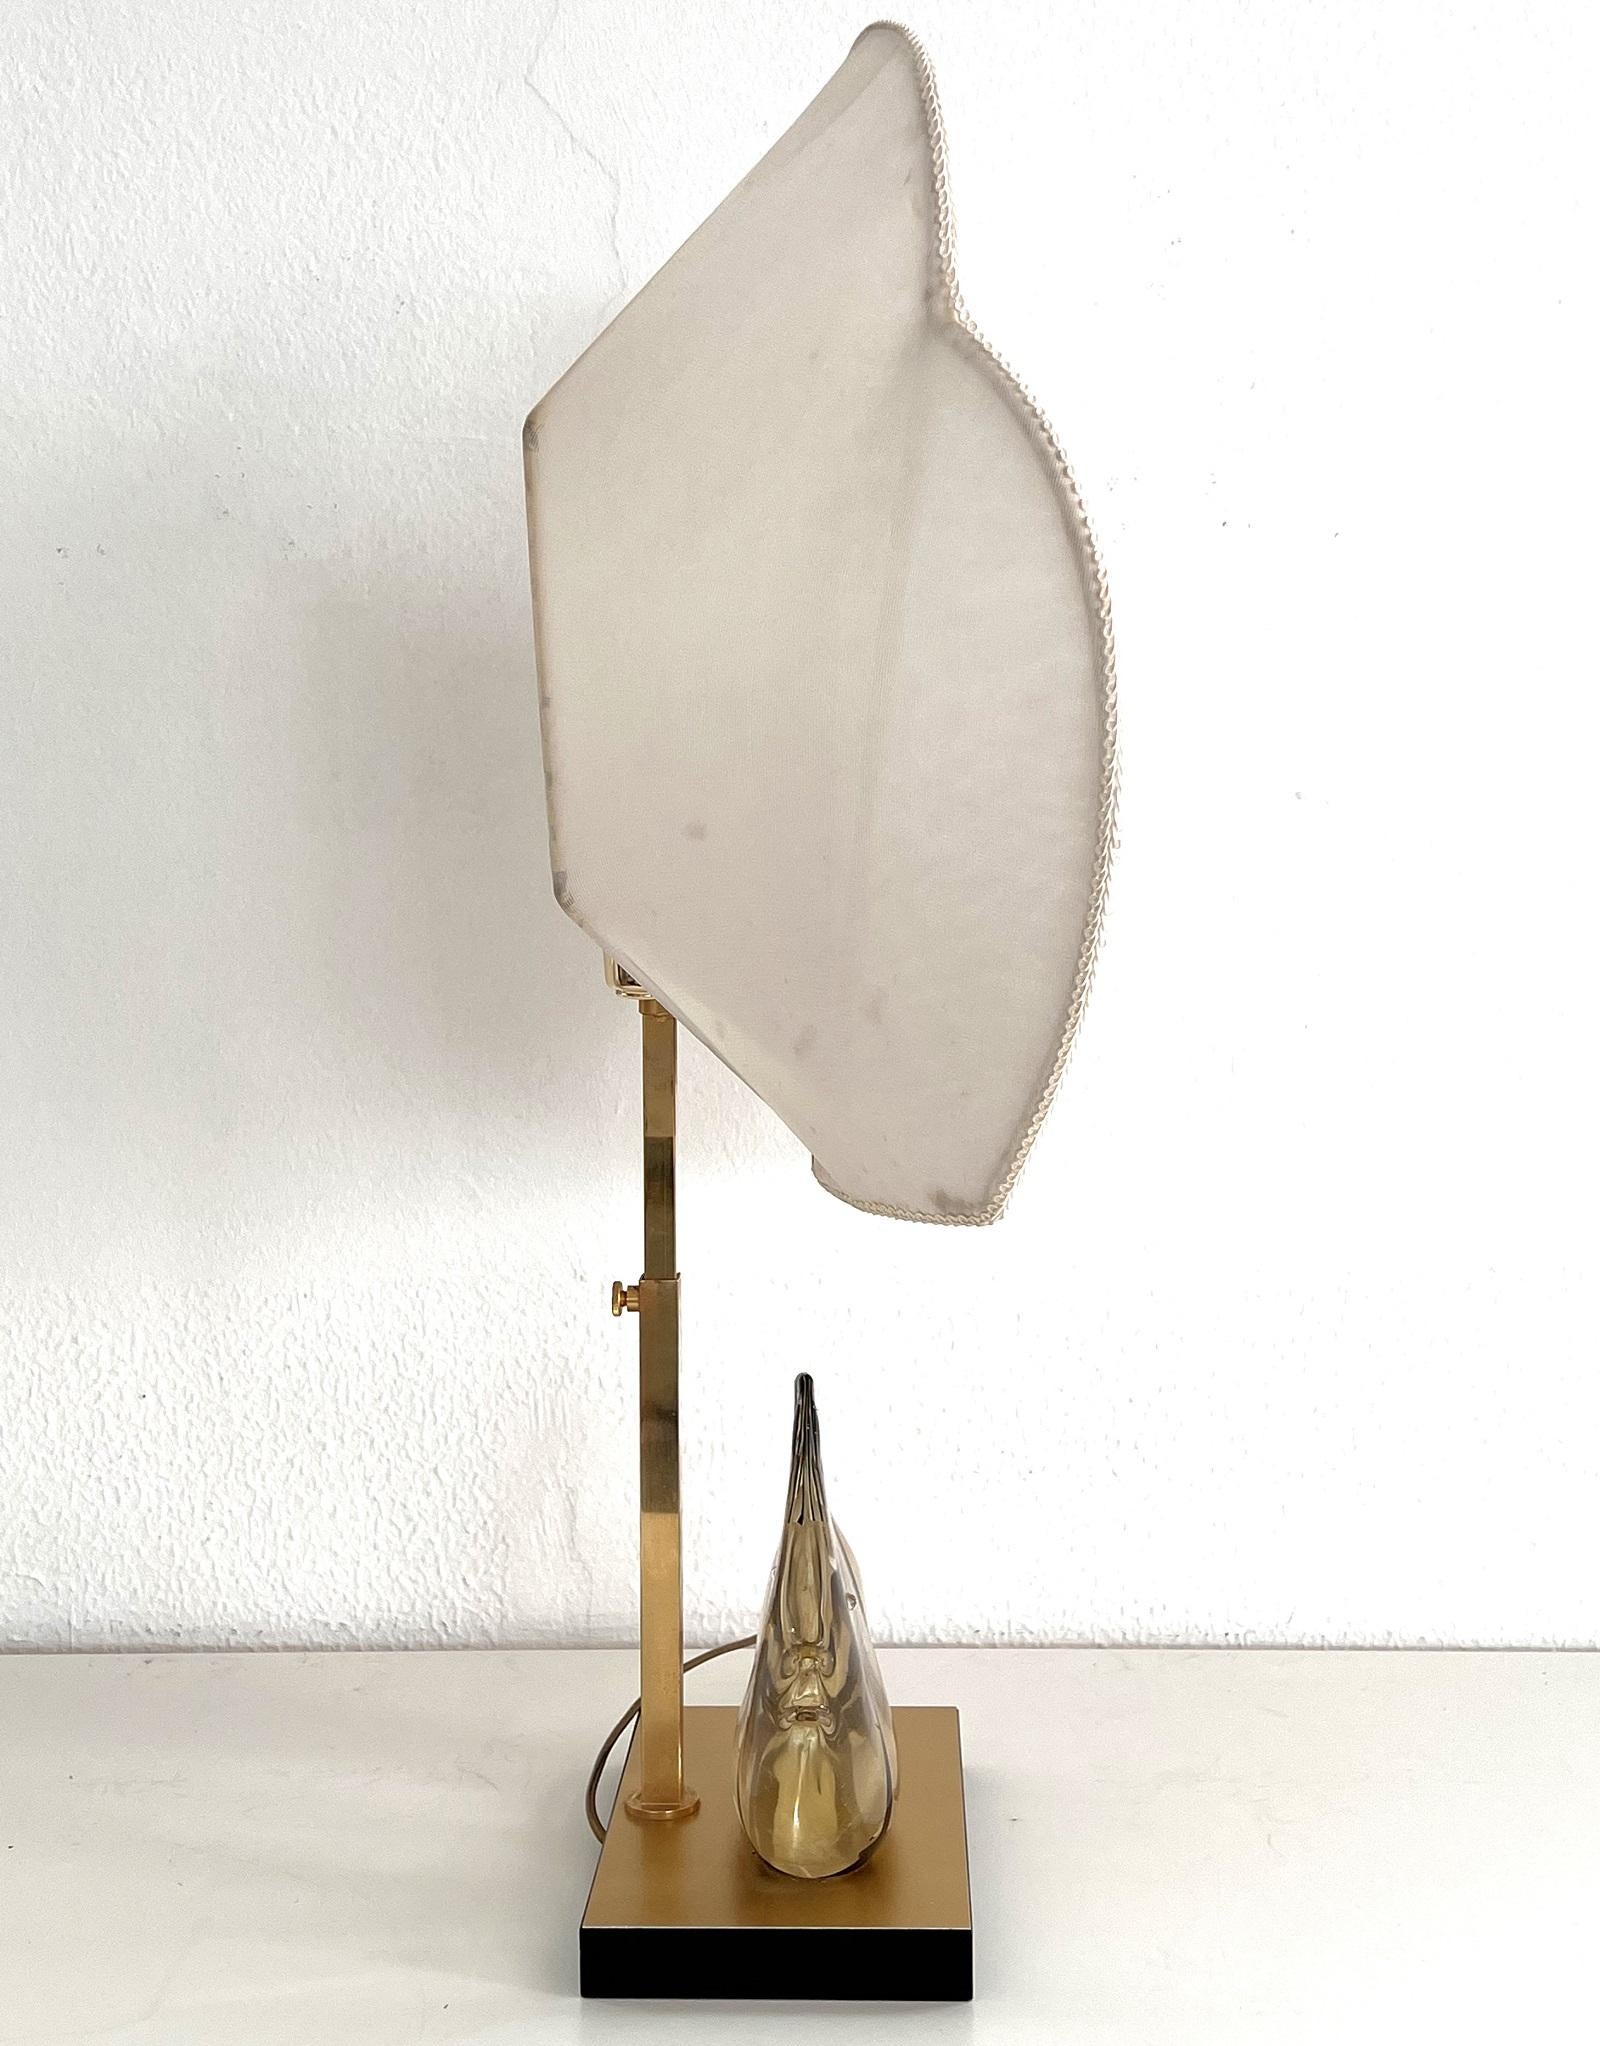 Italian Midcentury Murano Fish Glass and Brass Table Lamp, 1970s For Sale 4